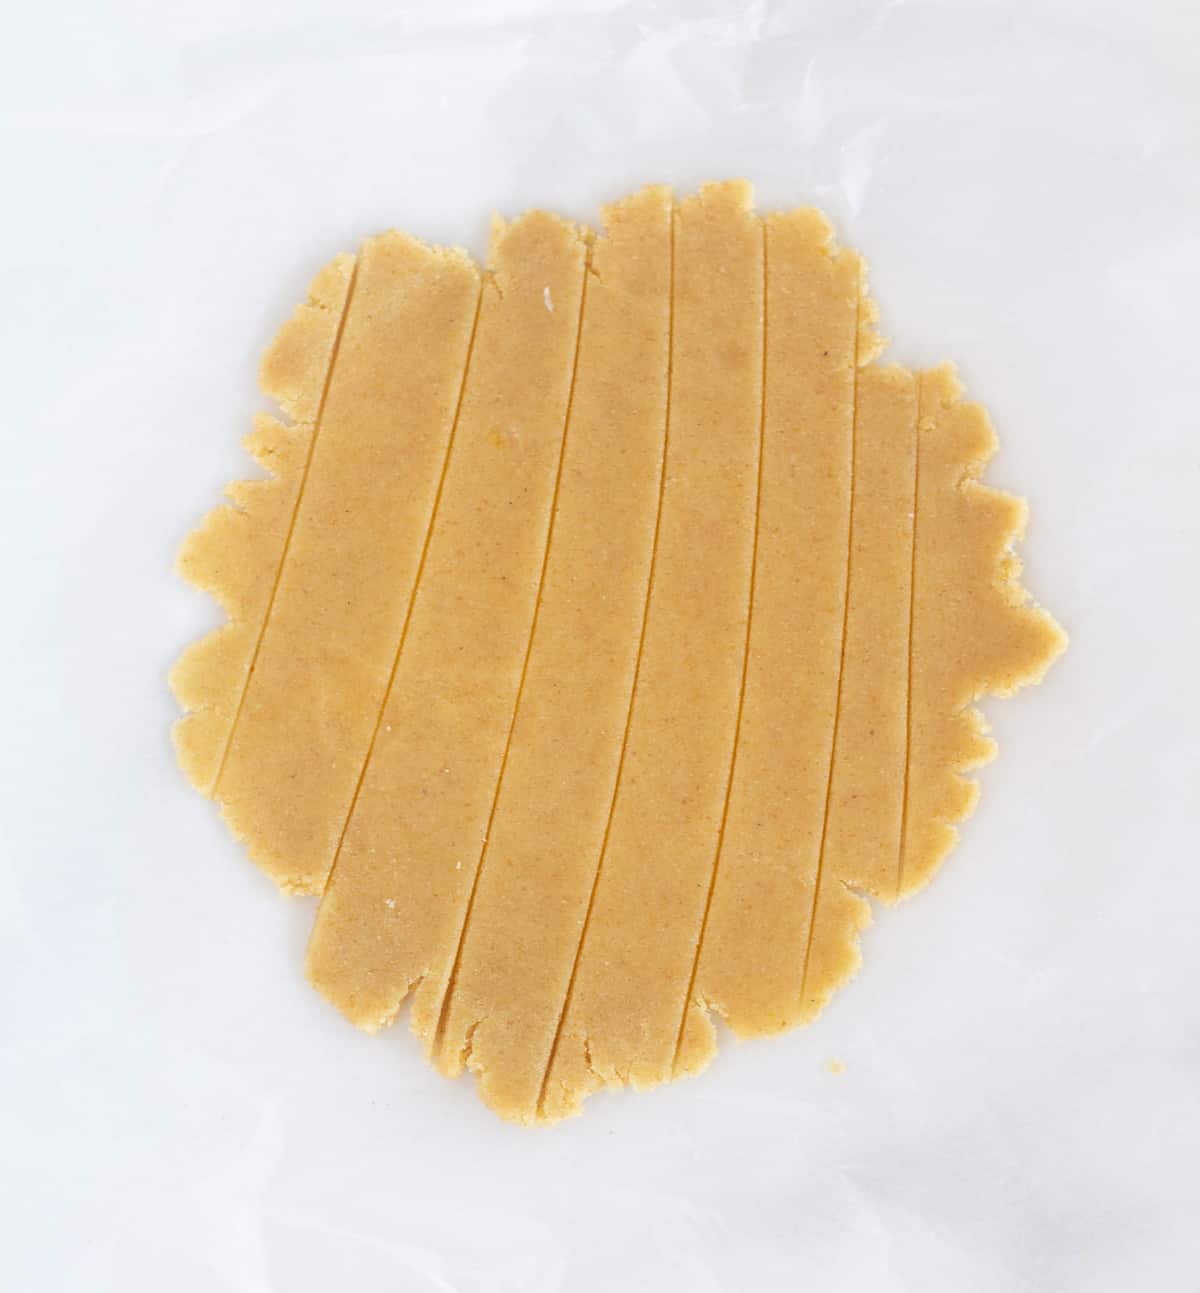 small piece of pie crust rolled out and cut into strips.